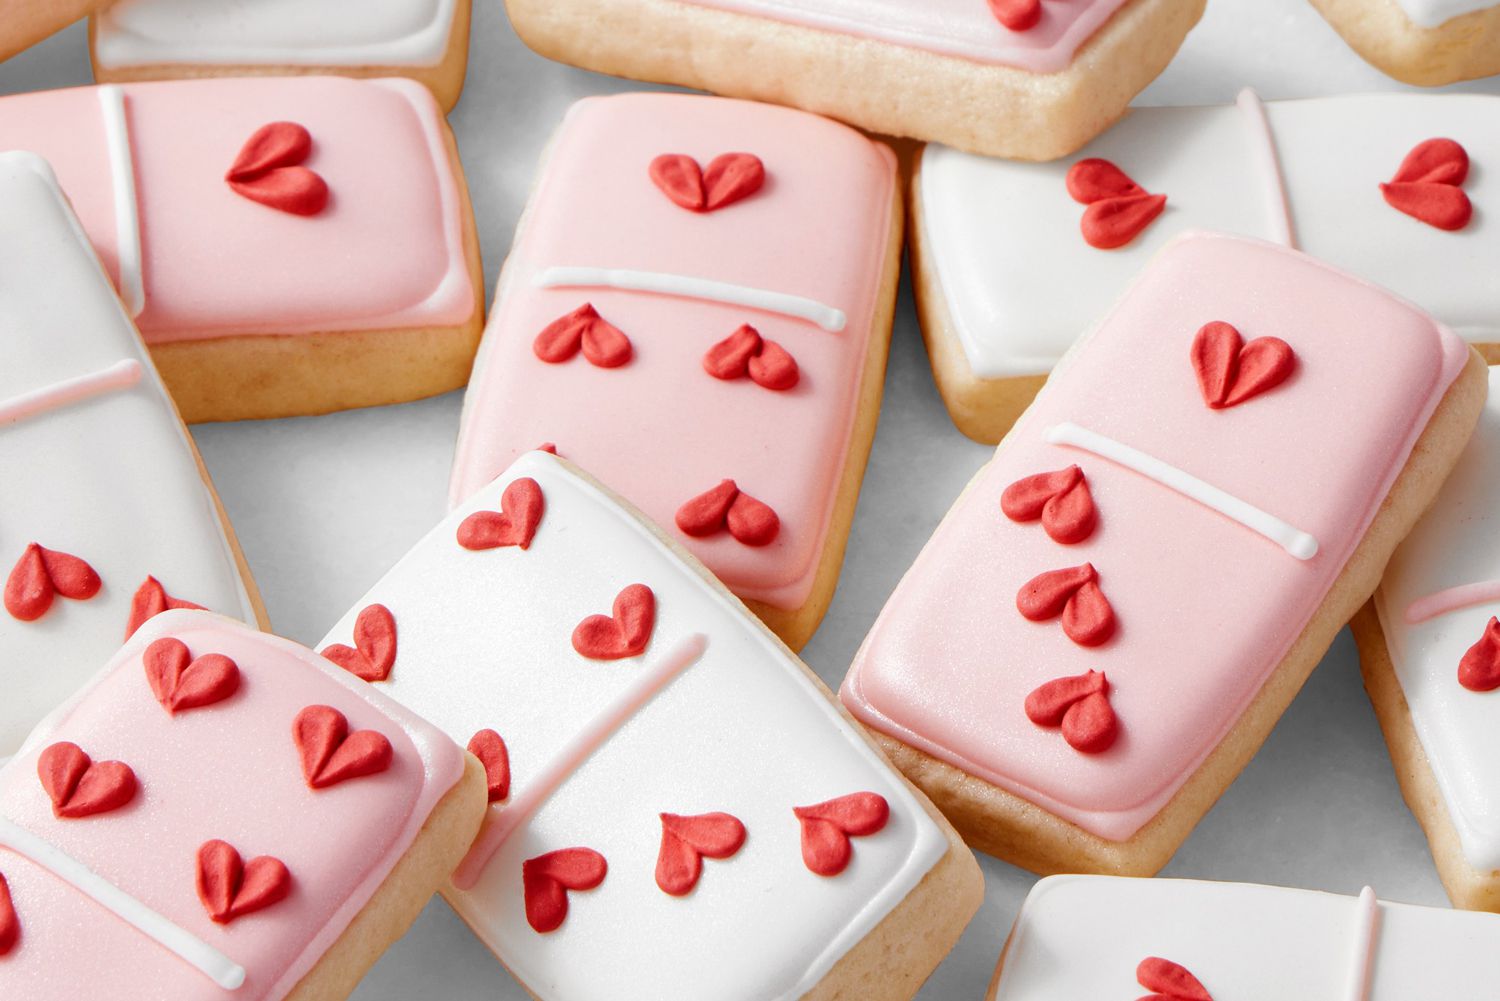 Williams Sonoma Great One Cookie Company Valentine's Day Domino Cookies